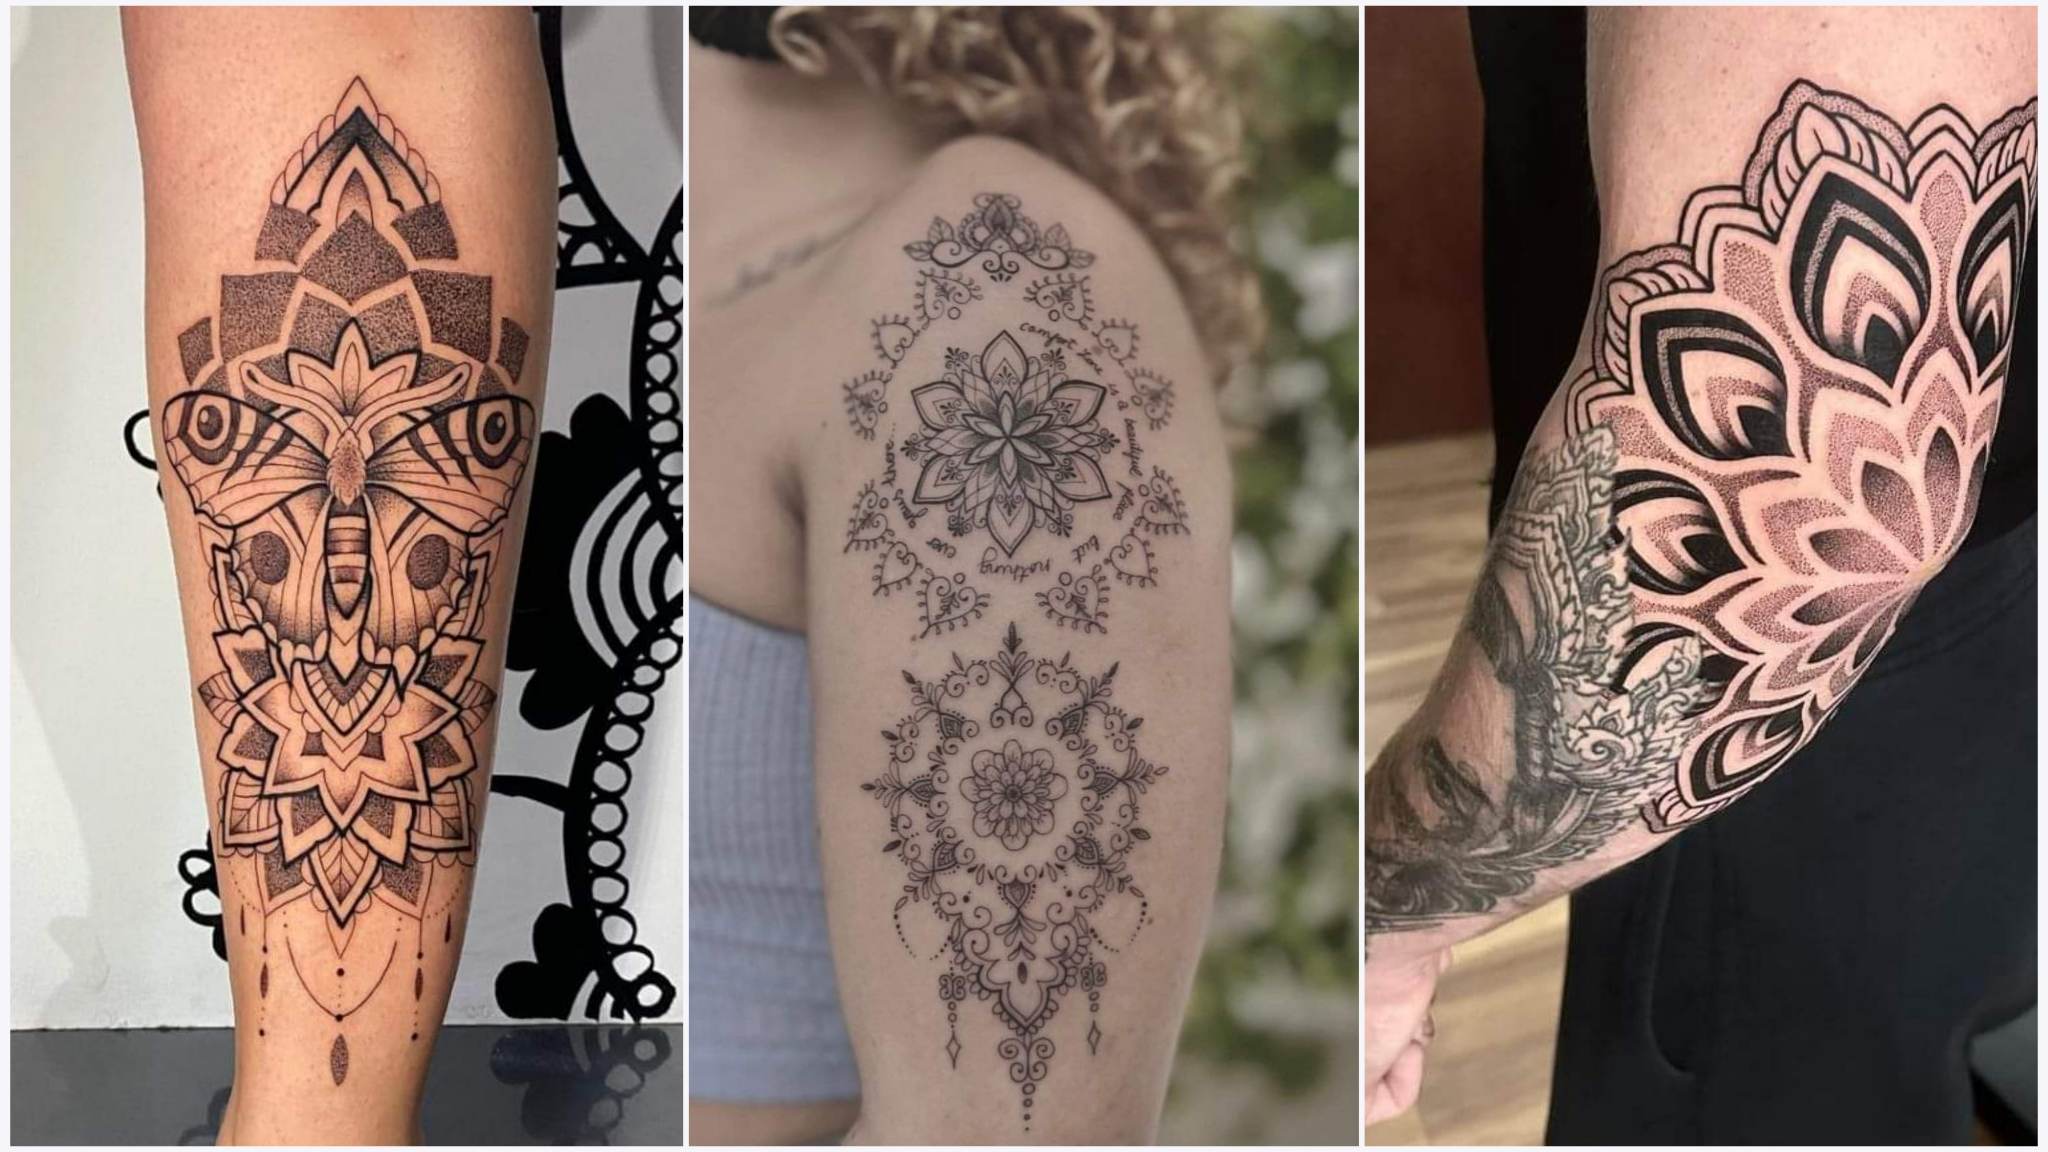 Aggregate more than 76 types of mandala tattoos best - in.cdgdbentre